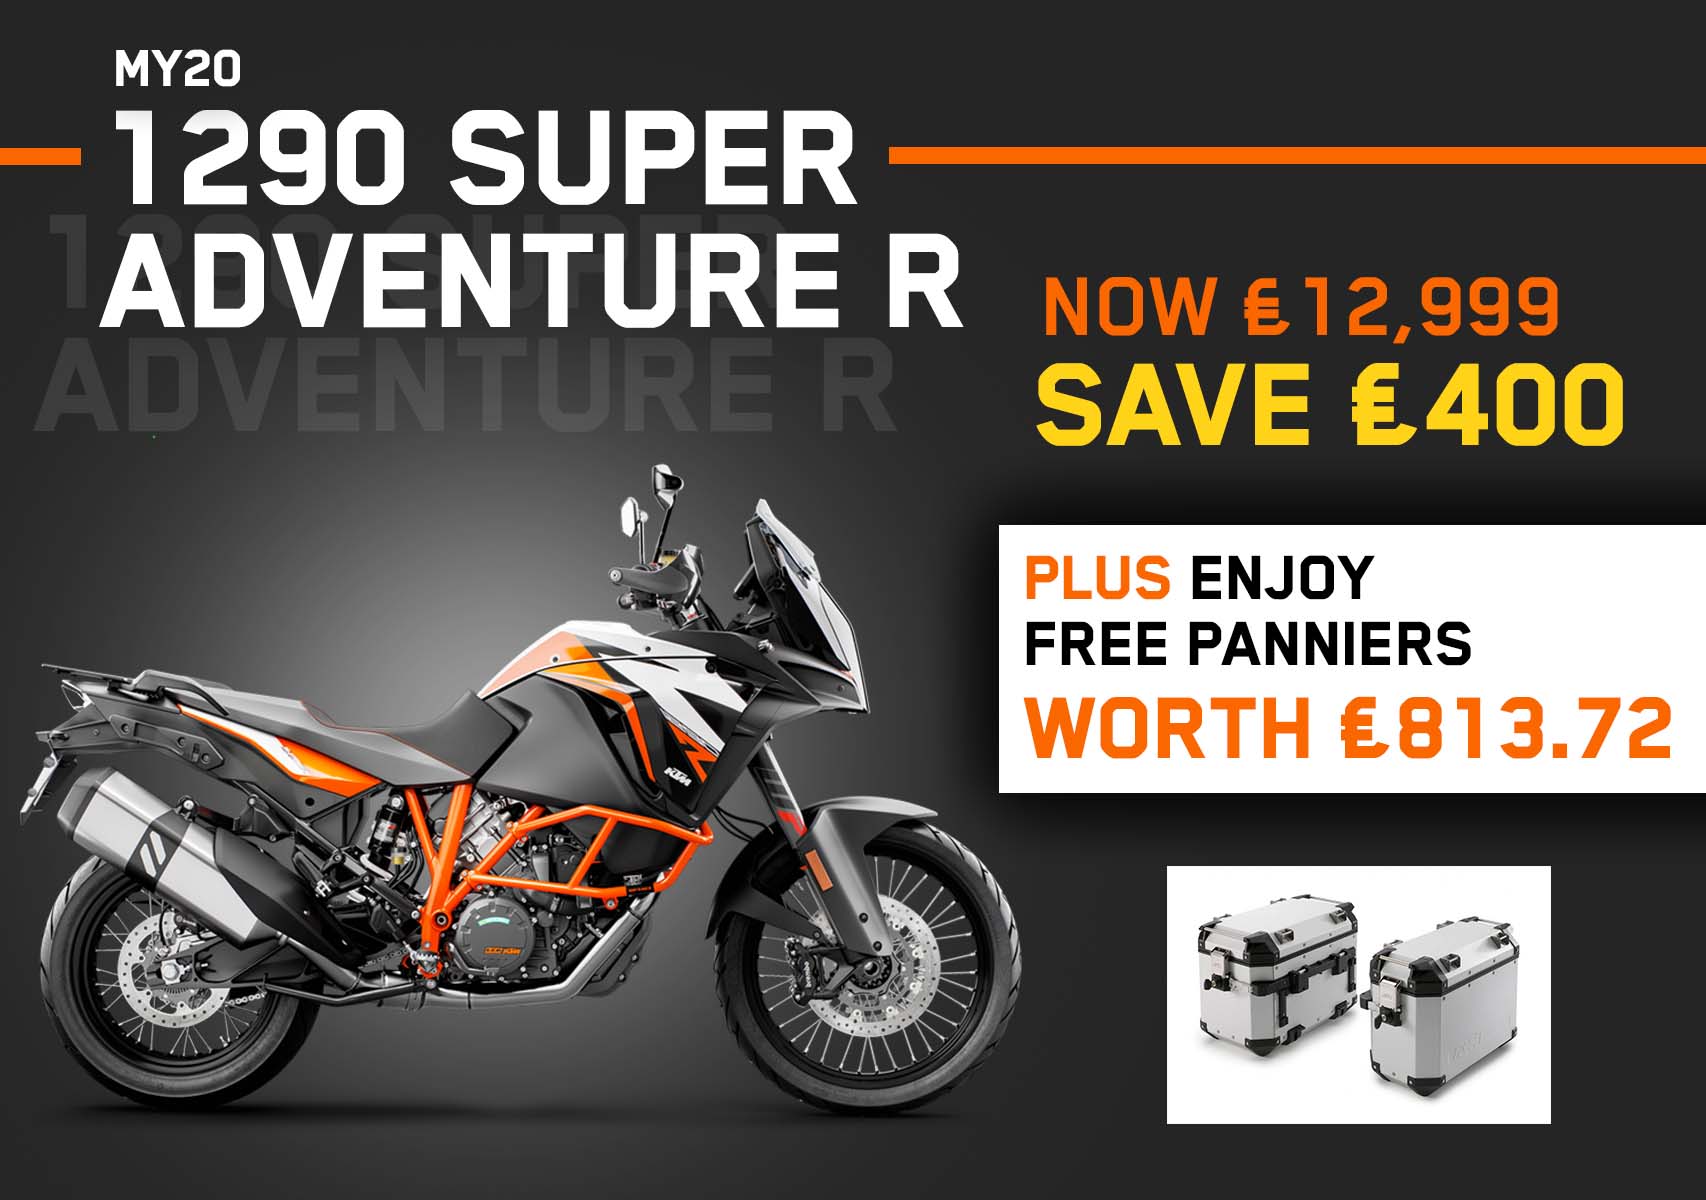 Laguna exclusive offer now available on the KTM 1290 Super Adventure R